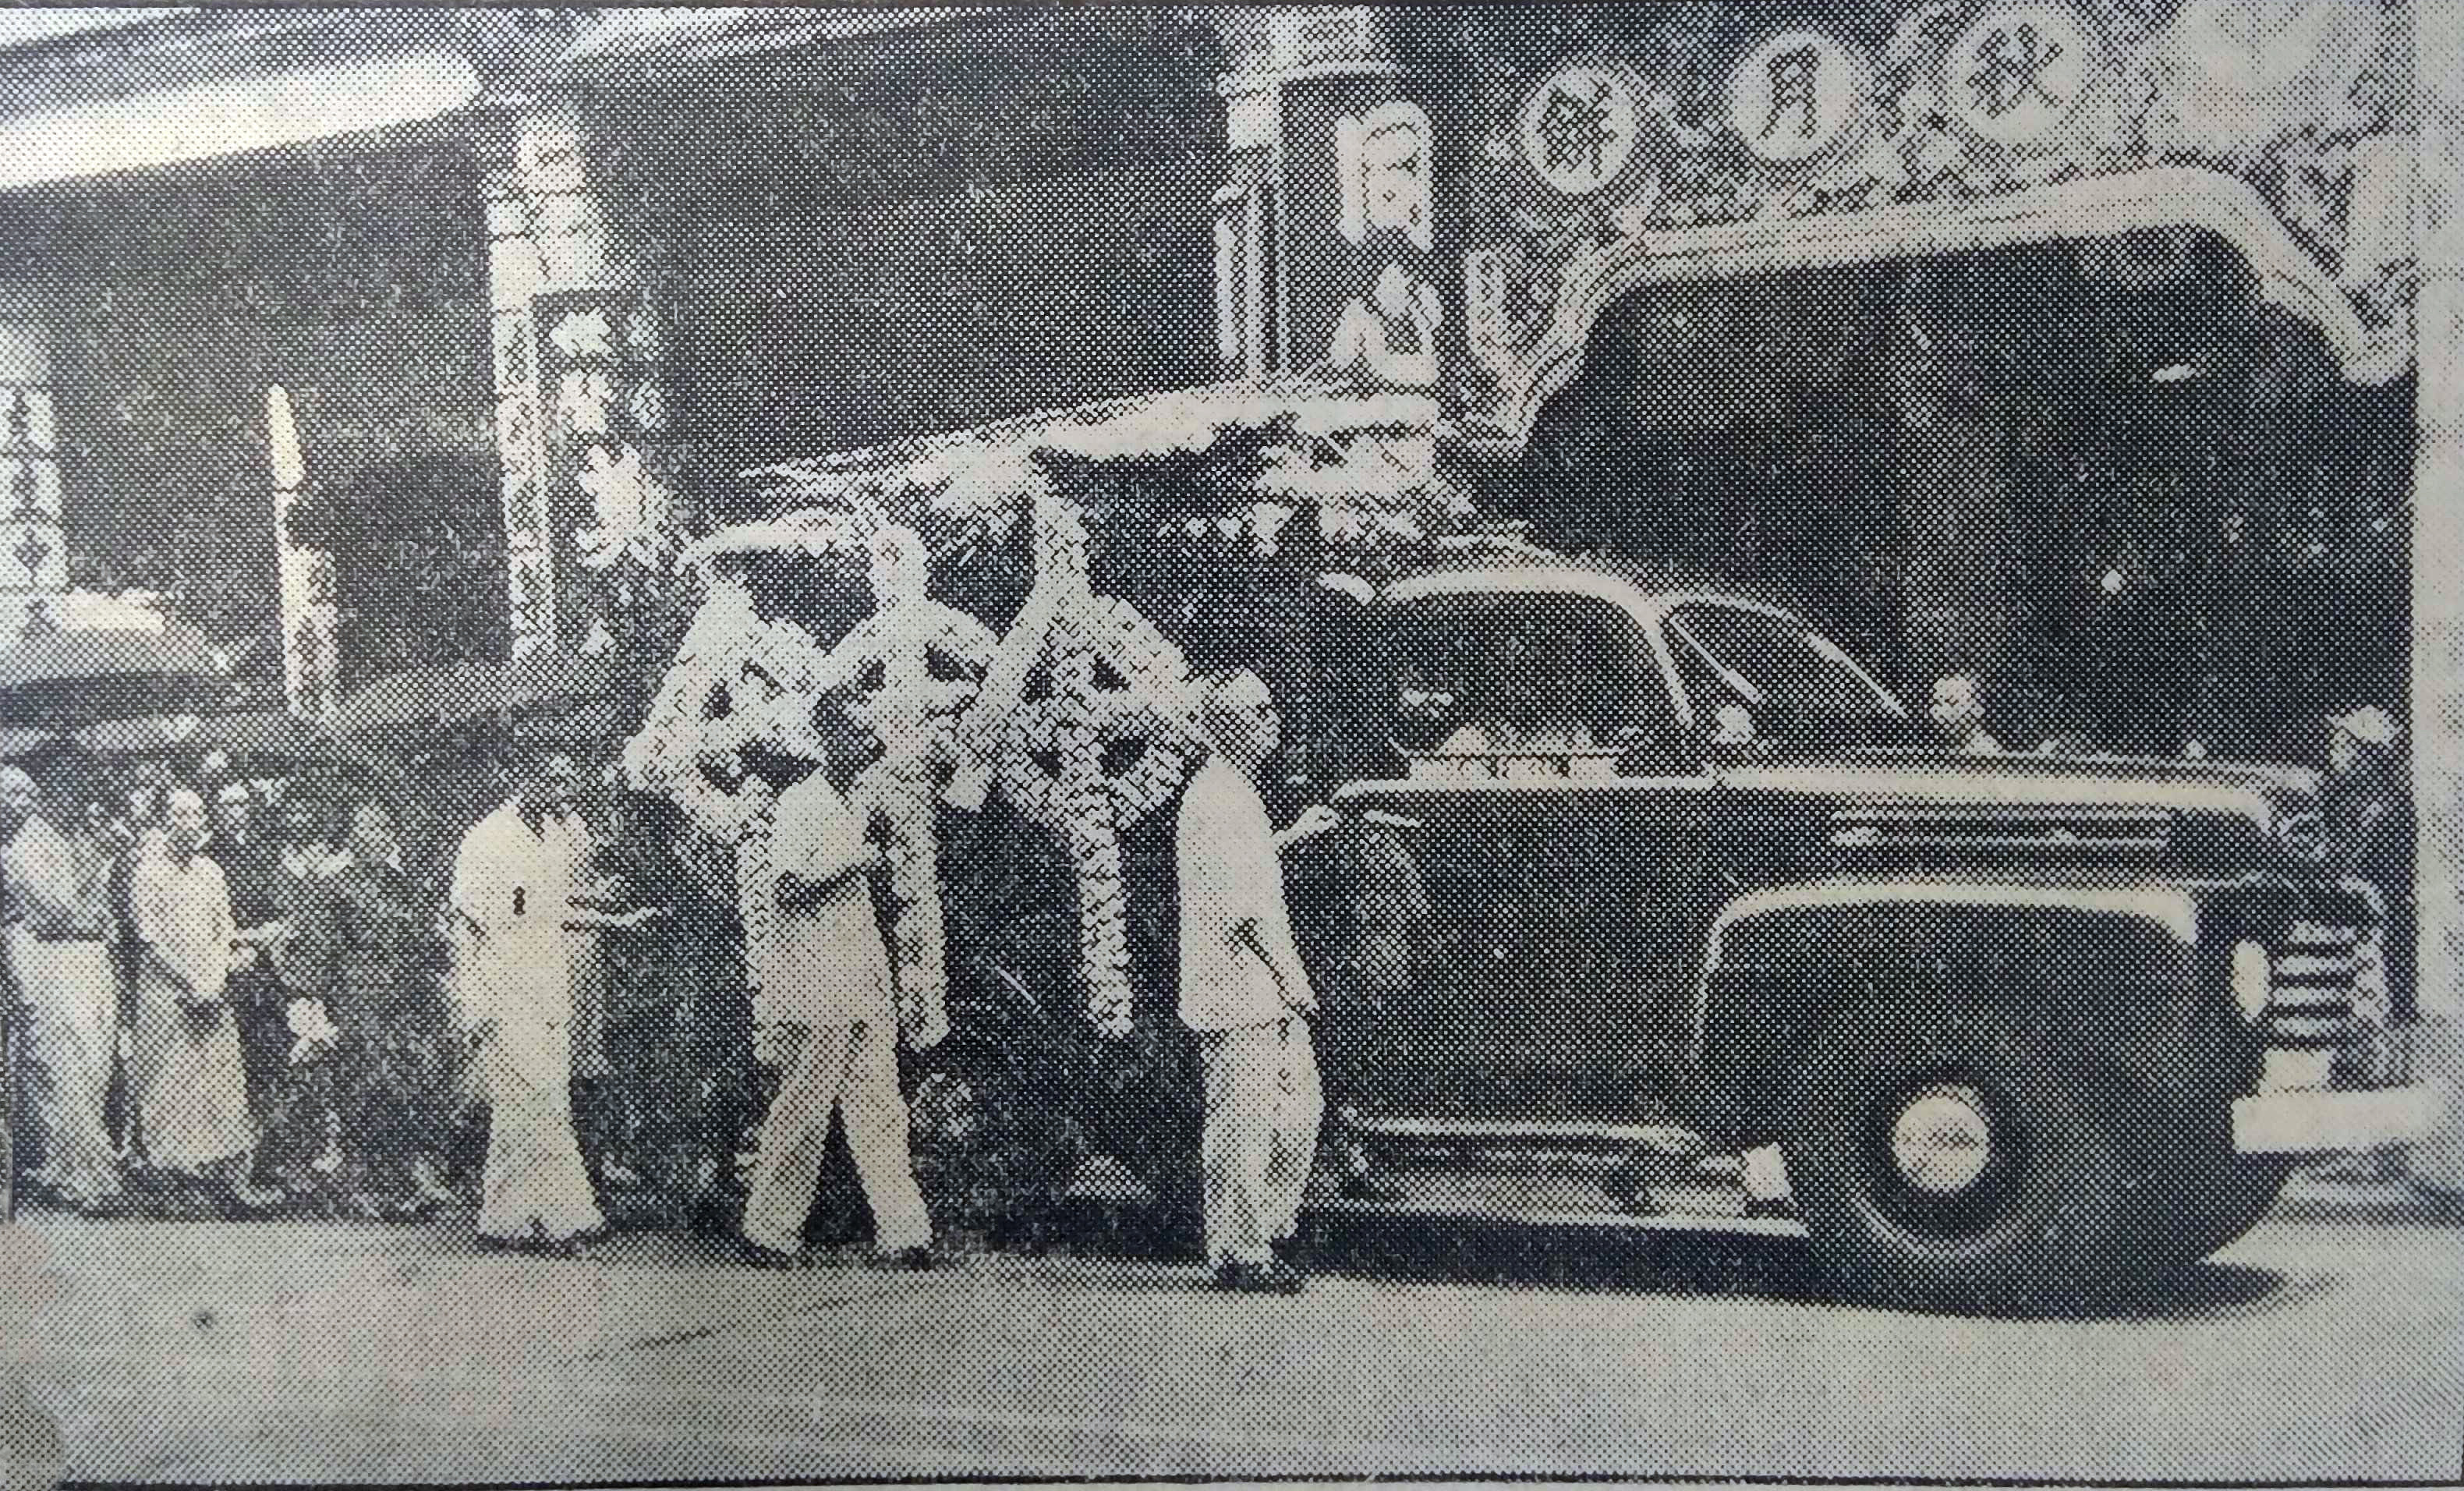 A funeral procession for two Catholic priests murdered in Wan Chai, Hong Kong in 1953. Night-soil collector Lo Shui-chung, 32, was charged with their murder but eventually acquitted. Photo: SCMP